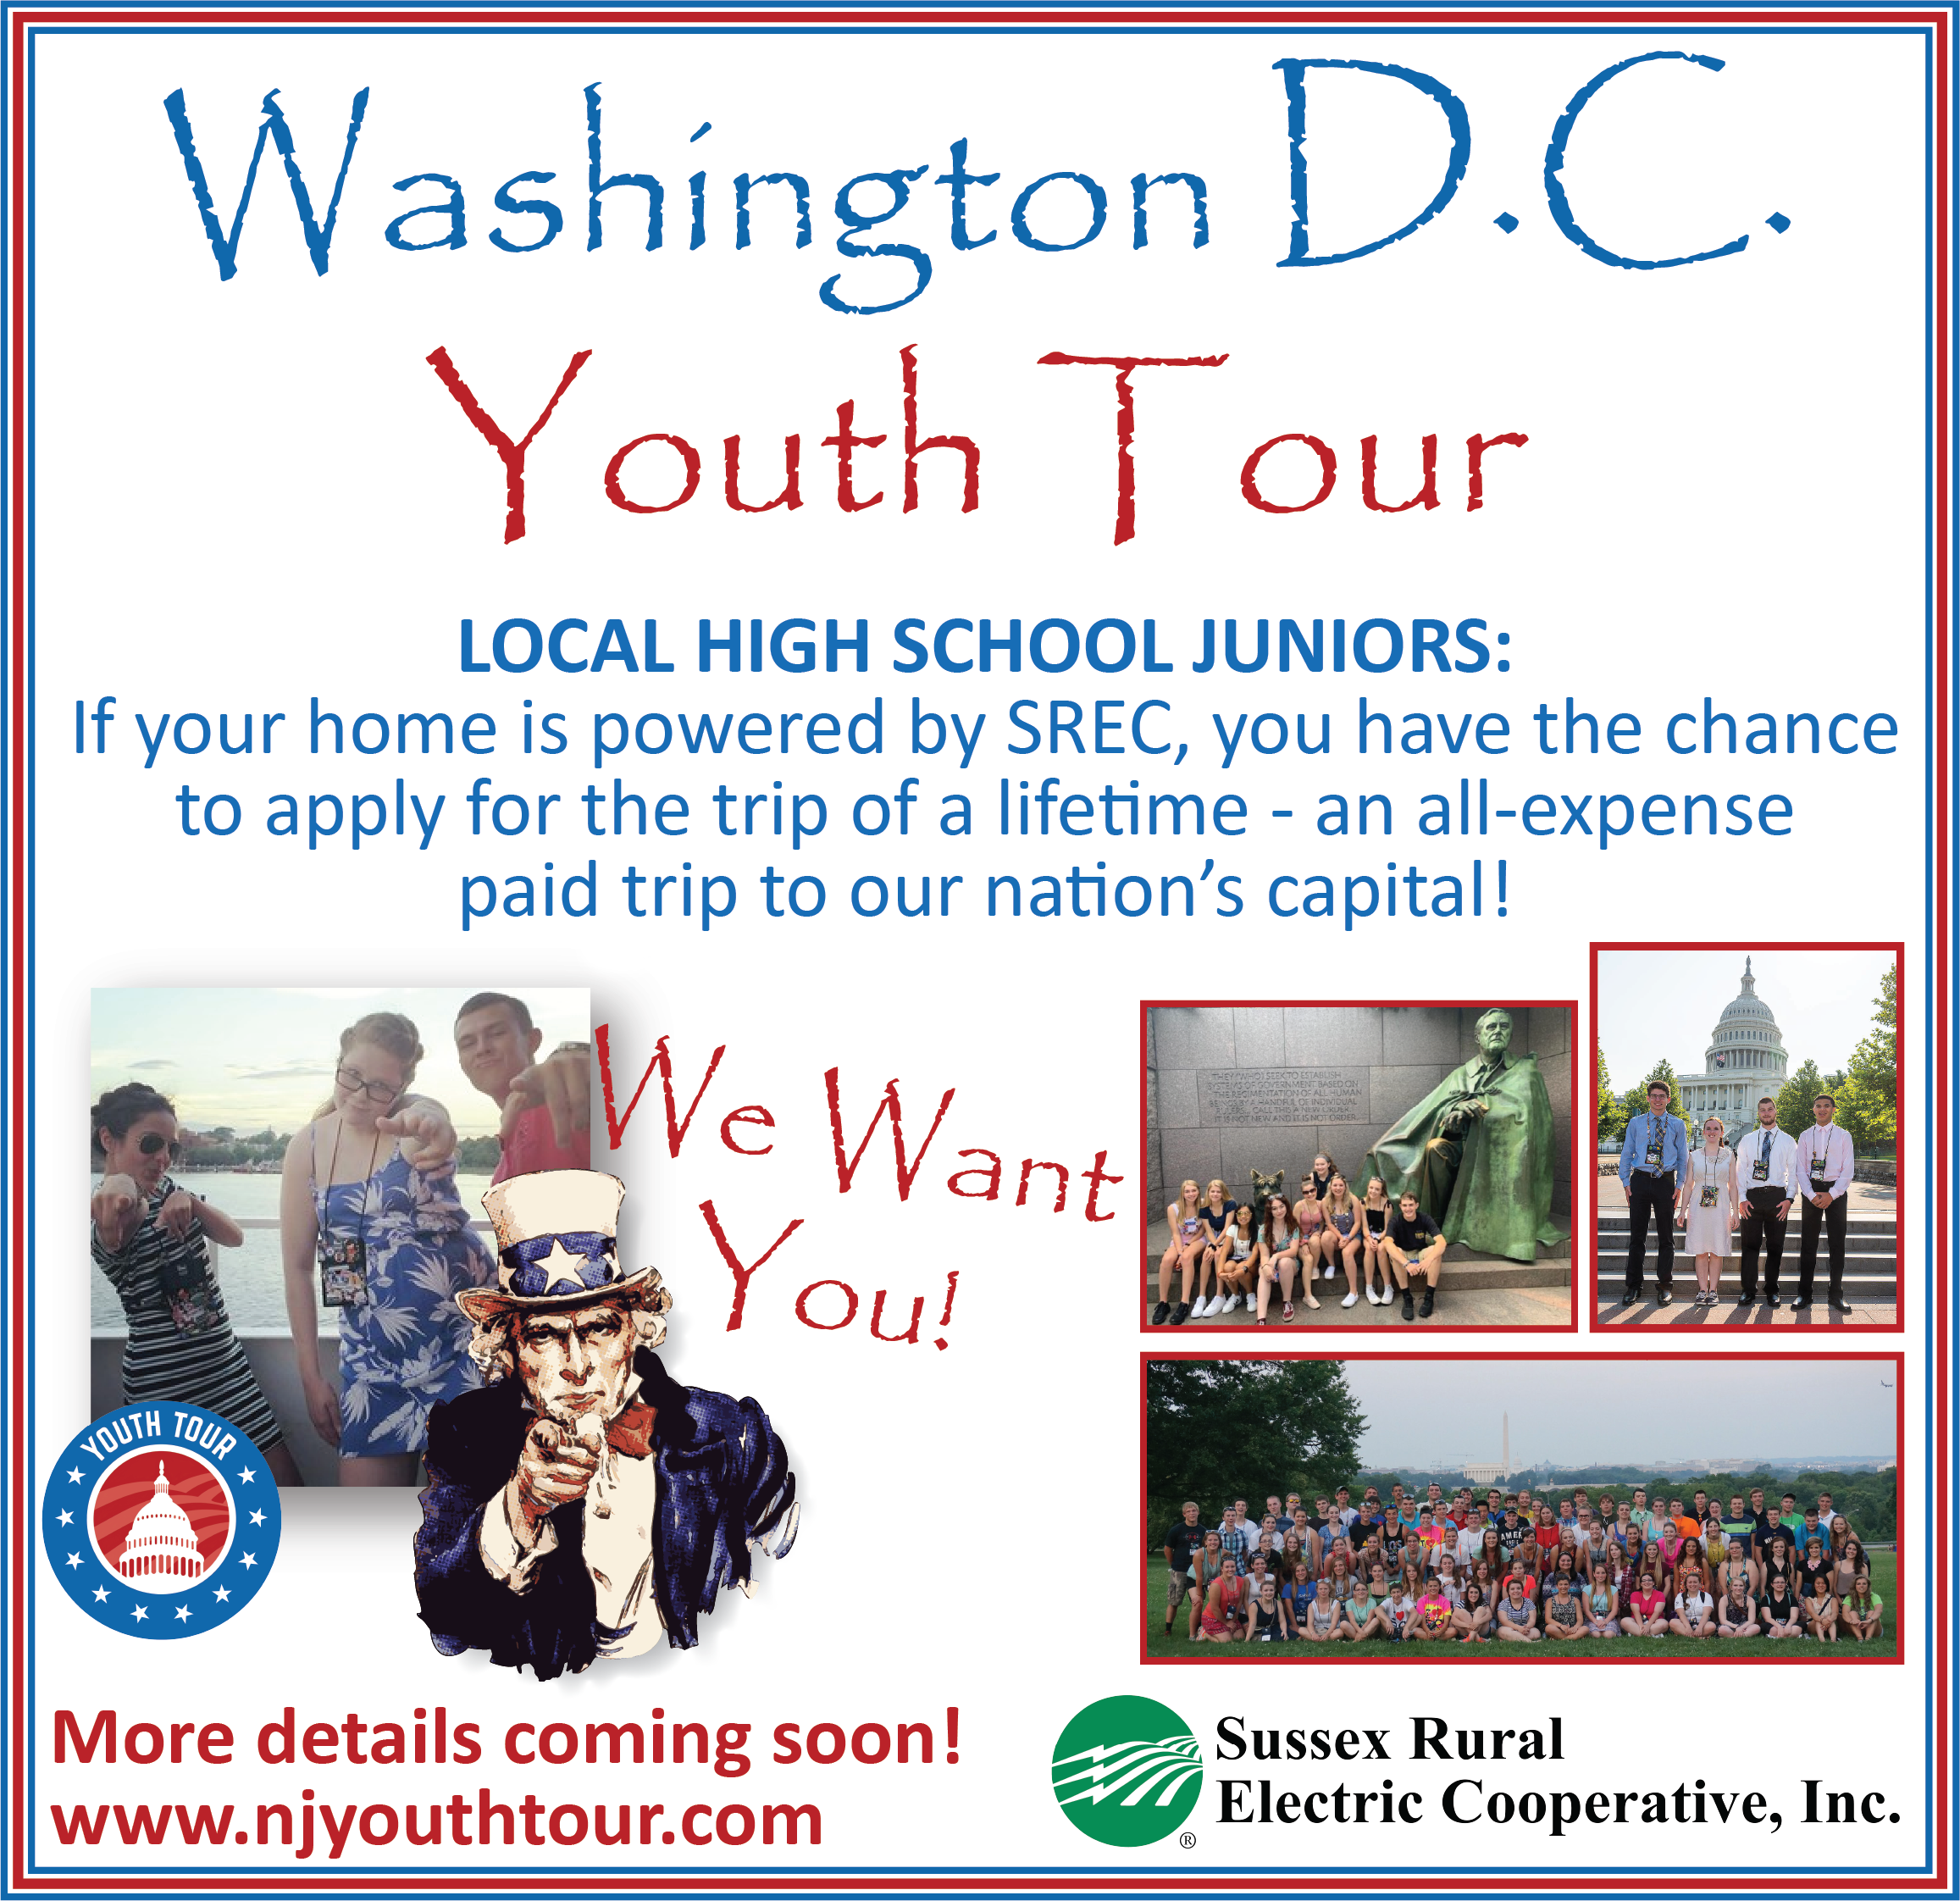 Washington D.C. 2022 Youth Tour - Local High School Juniors: If your home is powered by SREC, you have the chance to apply for the trip of a lifetime - an all-expense paid trip to our nation's capital! June 19th - 24th, 2022. WE WANT YOU! More details coming soon at www.njyouthtour.com.